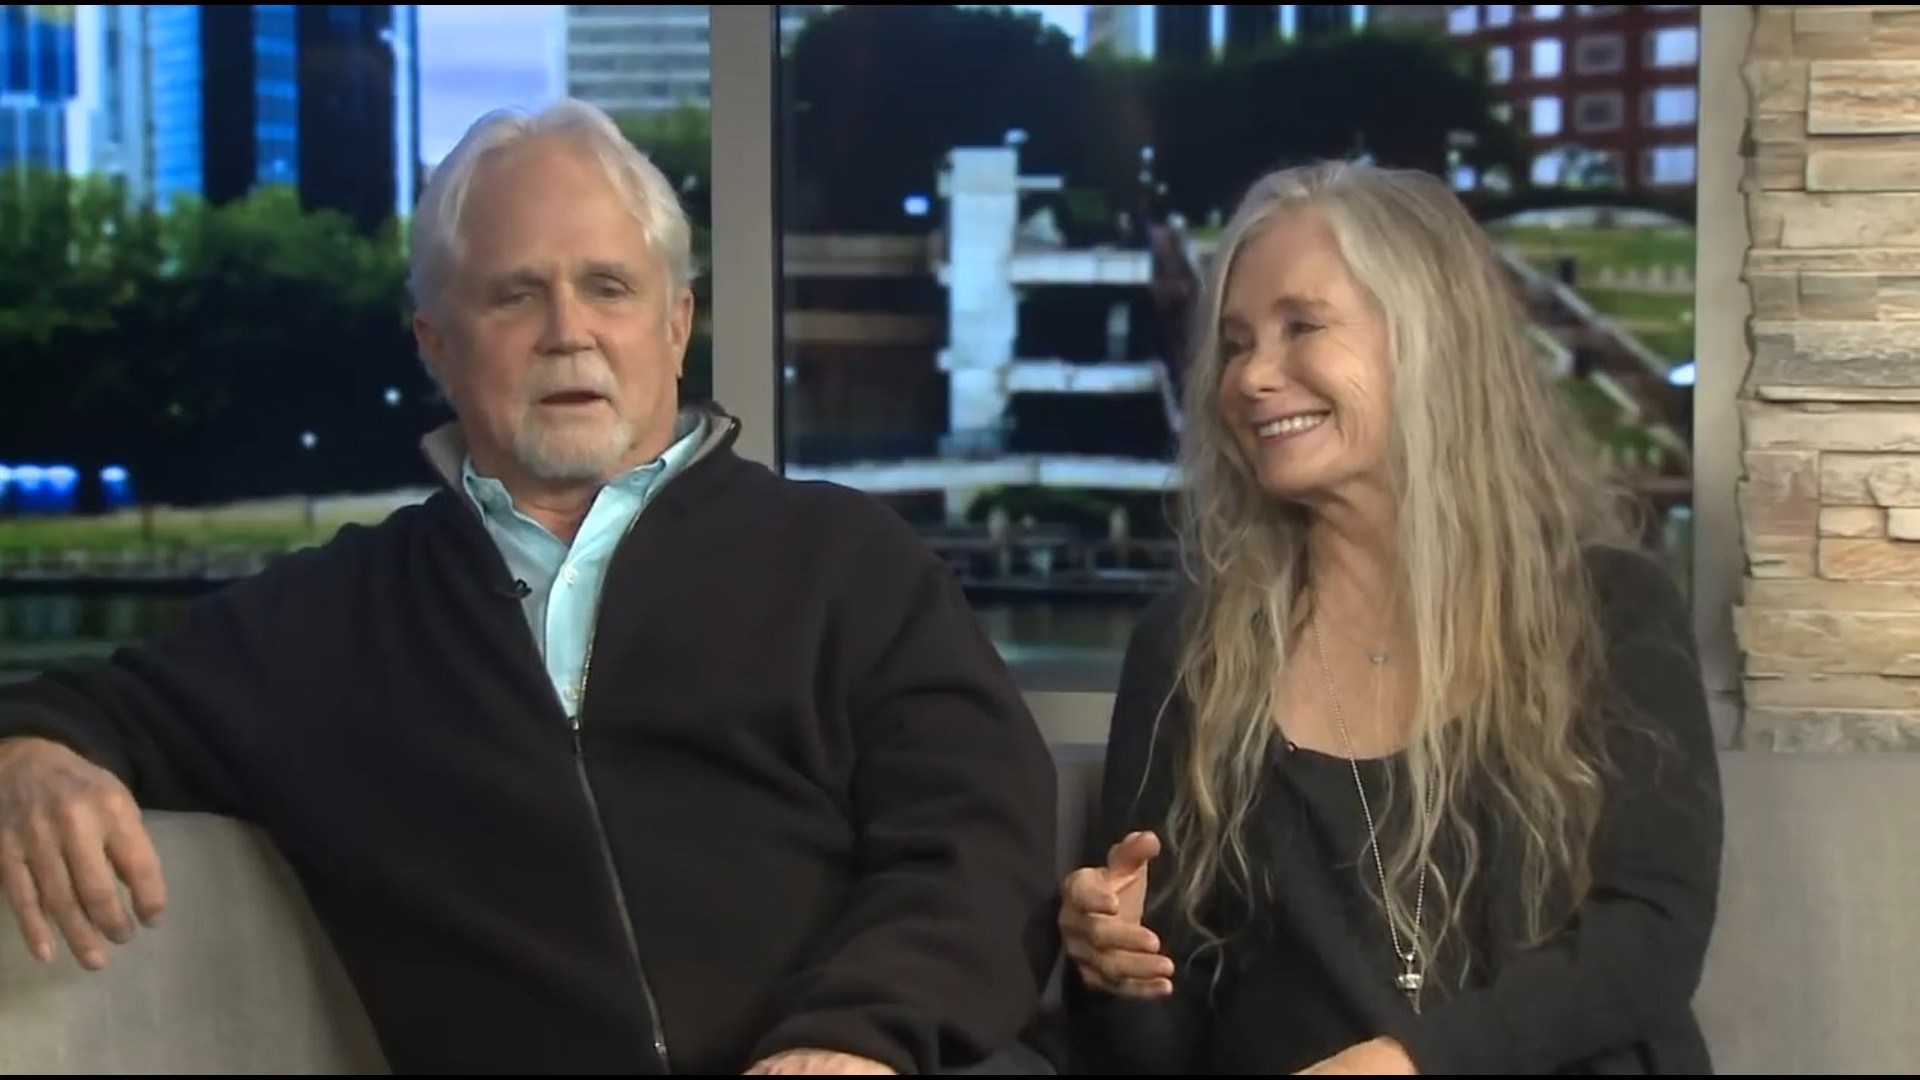 Tony Dow and his wife Lauren talked with us in February 2018. He played Wally Cleaver on the "Leave it to Beaver" sitcom in the 1950s and 60s.